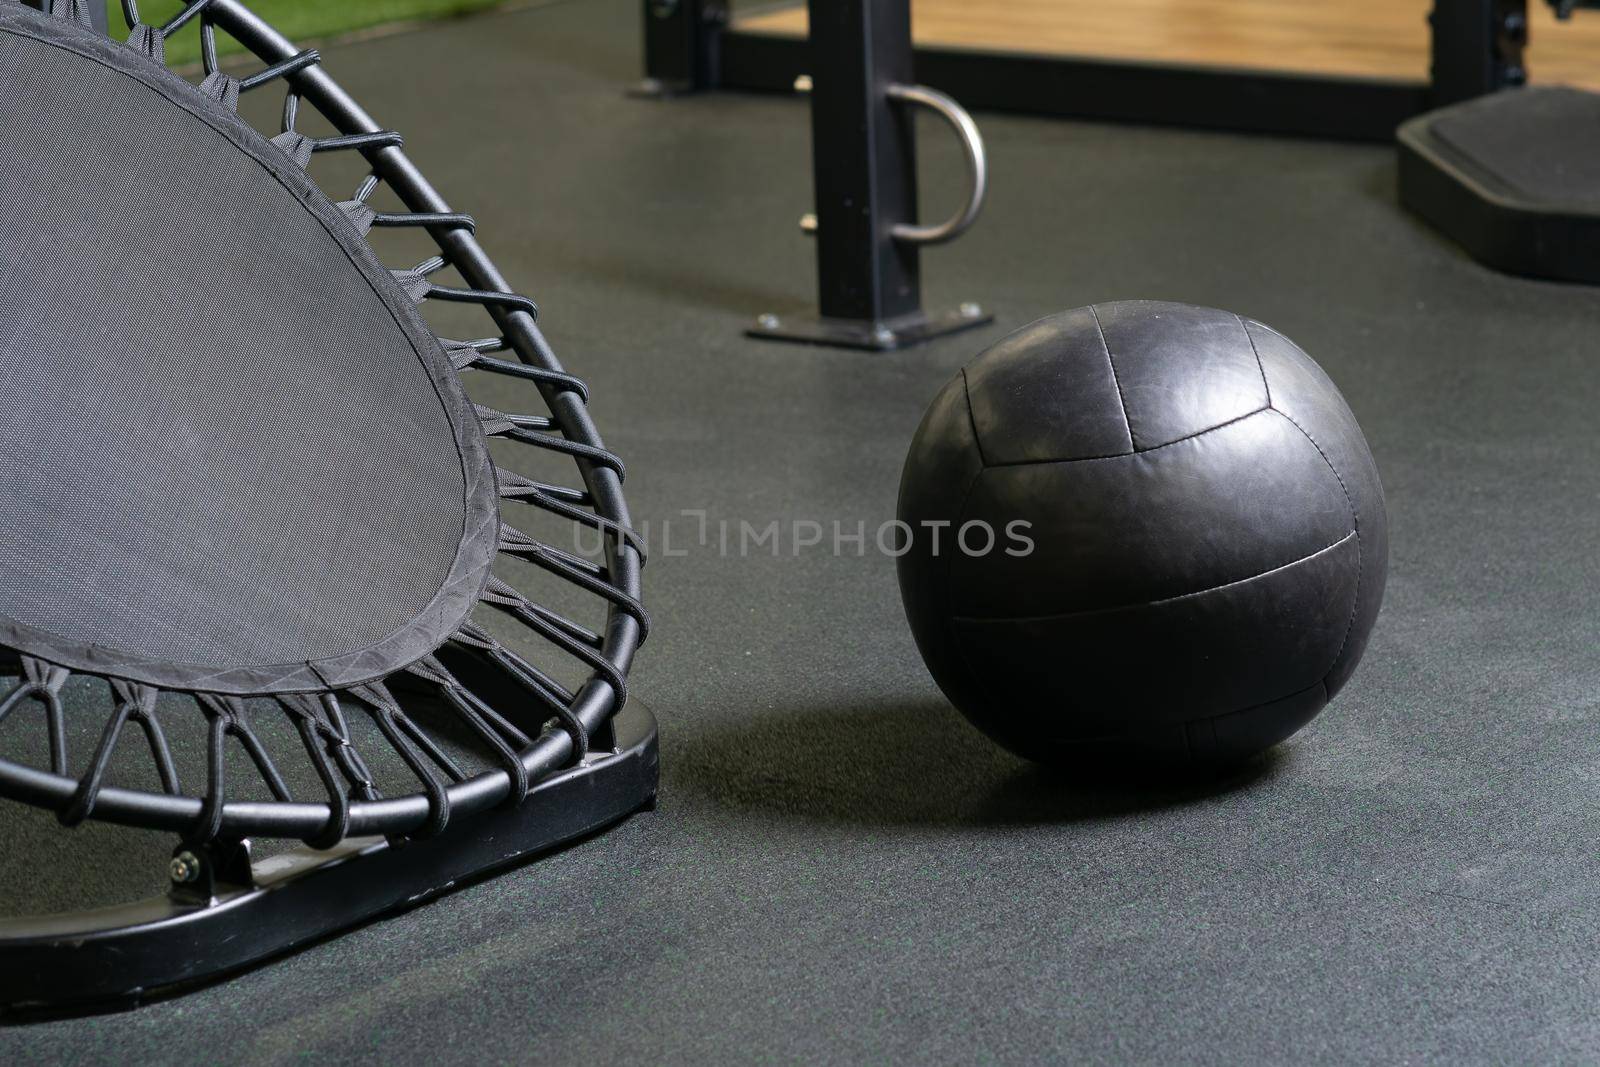 Sports home trampoline backyard patio concept wooden kettlebell exercise, from swiss gym in bounce and steel weight, club healthy. Lifestyle active gymnastics, playful by 89167702191